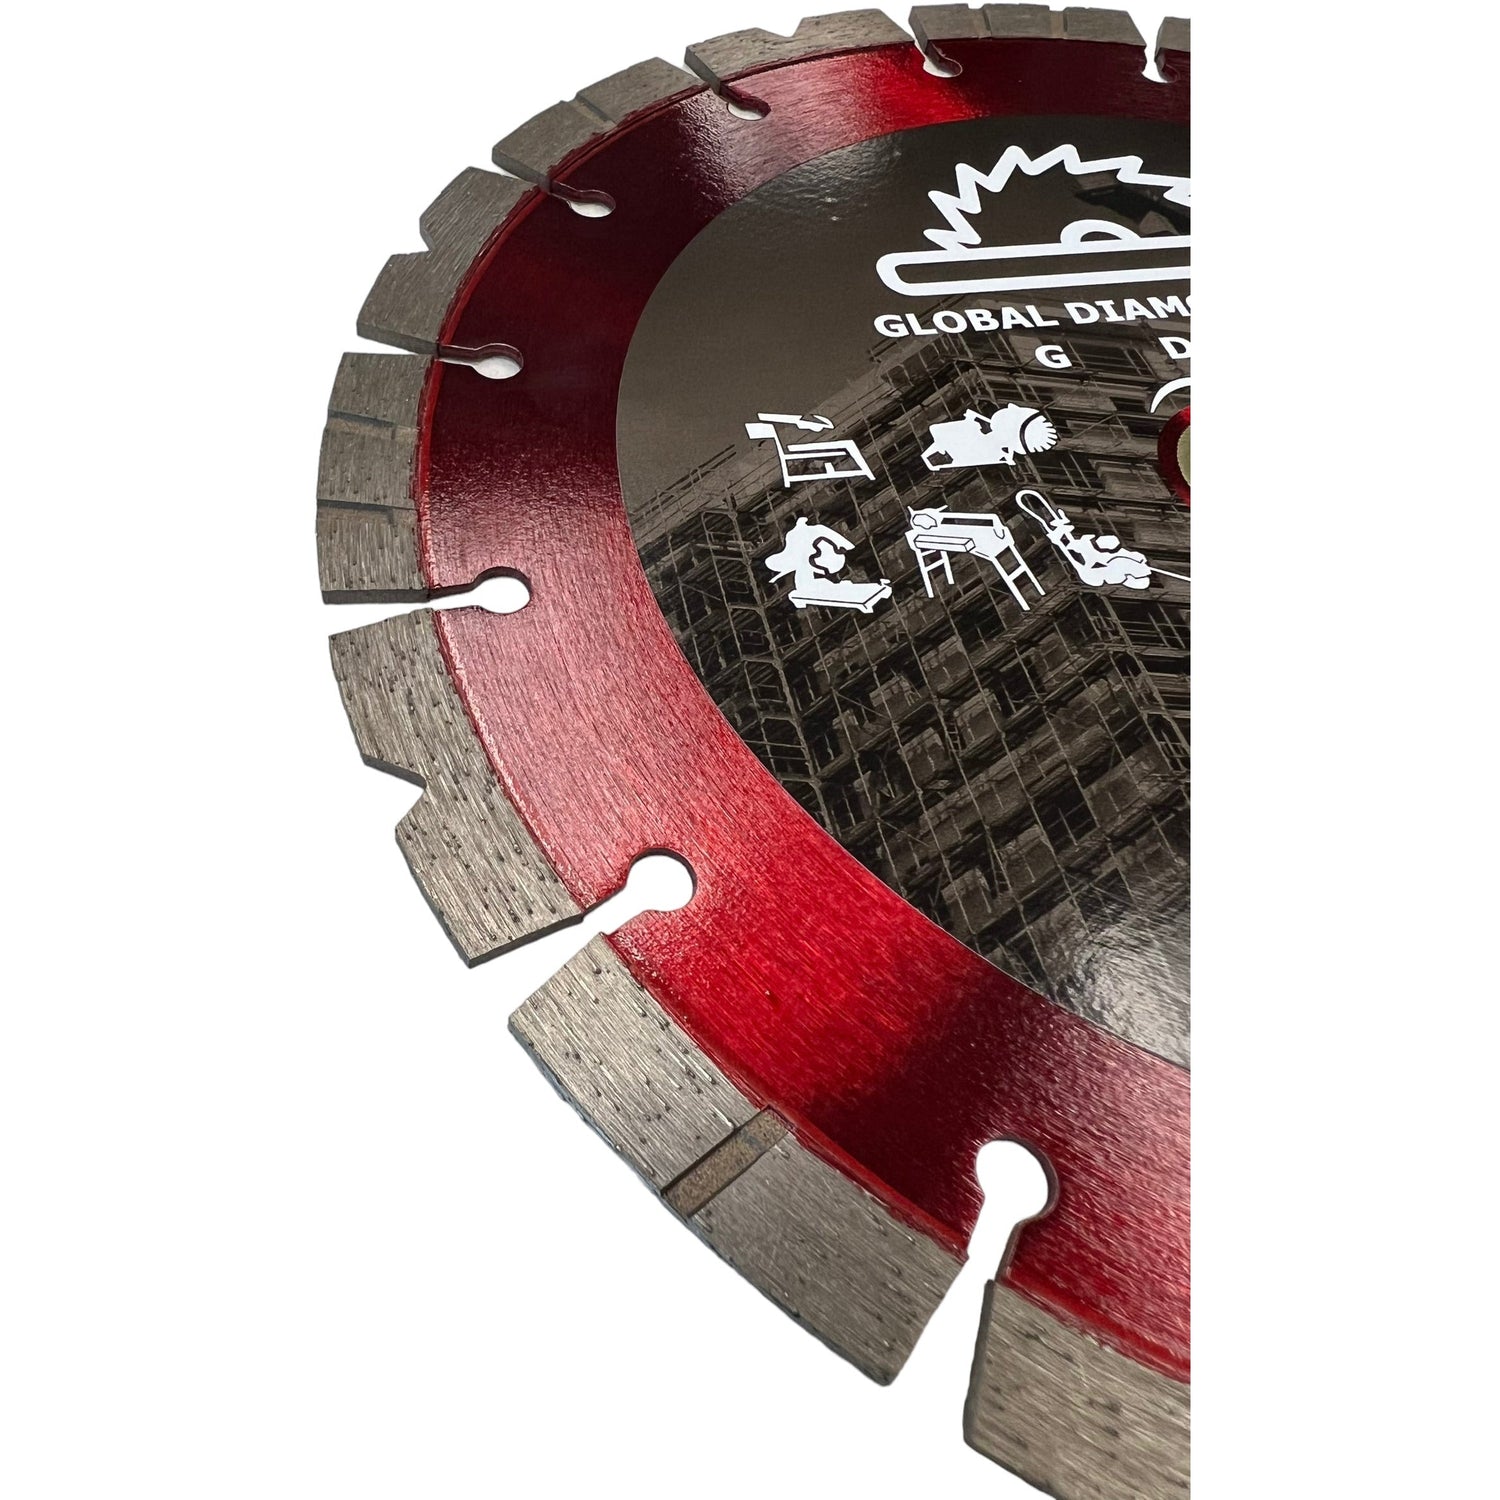 9" battery saw blade